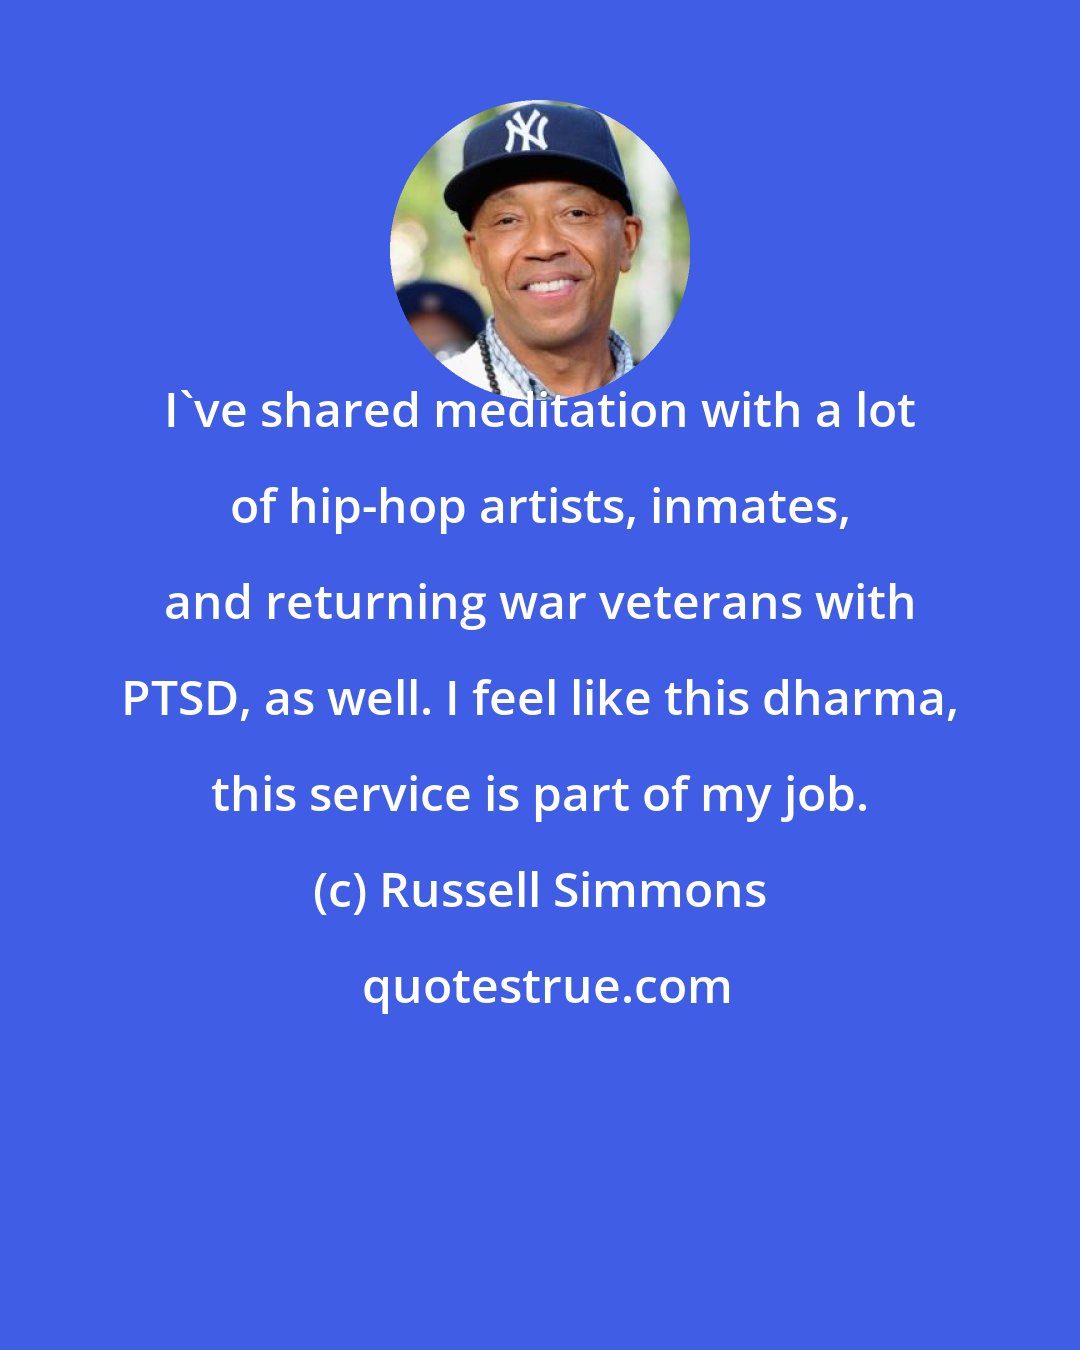 Russell Simmons: I've shared meditation with a lot of hip-hop artists, inmates, and returning war veterans with PTSD, as well. I feel like this dharma, this service is part of my job.